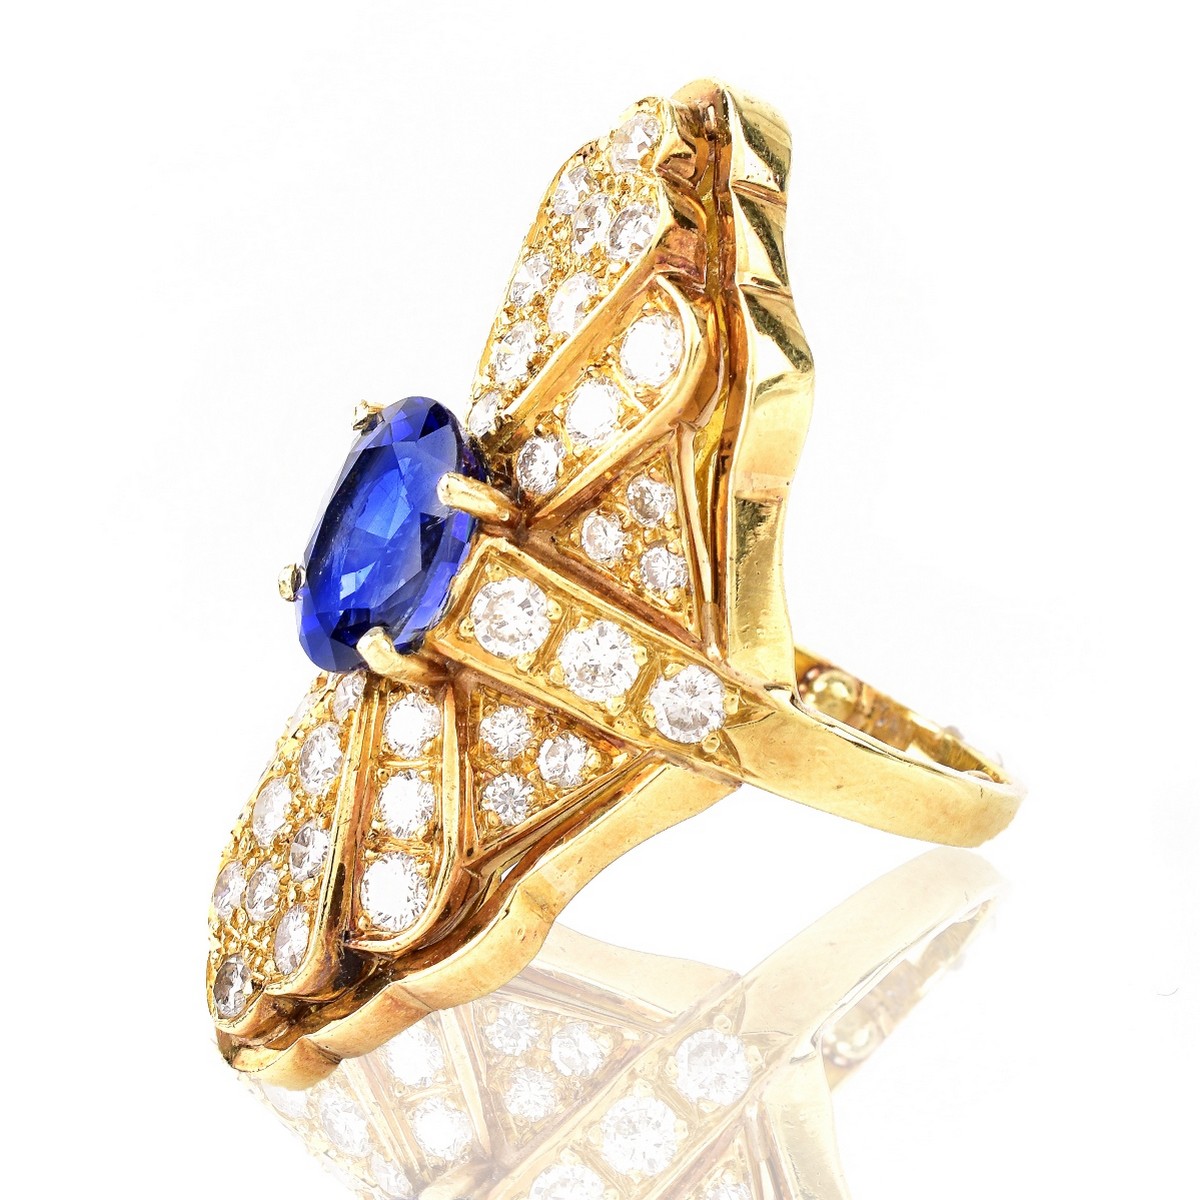 Sapphire, Diamond and 18K Gold Ring.